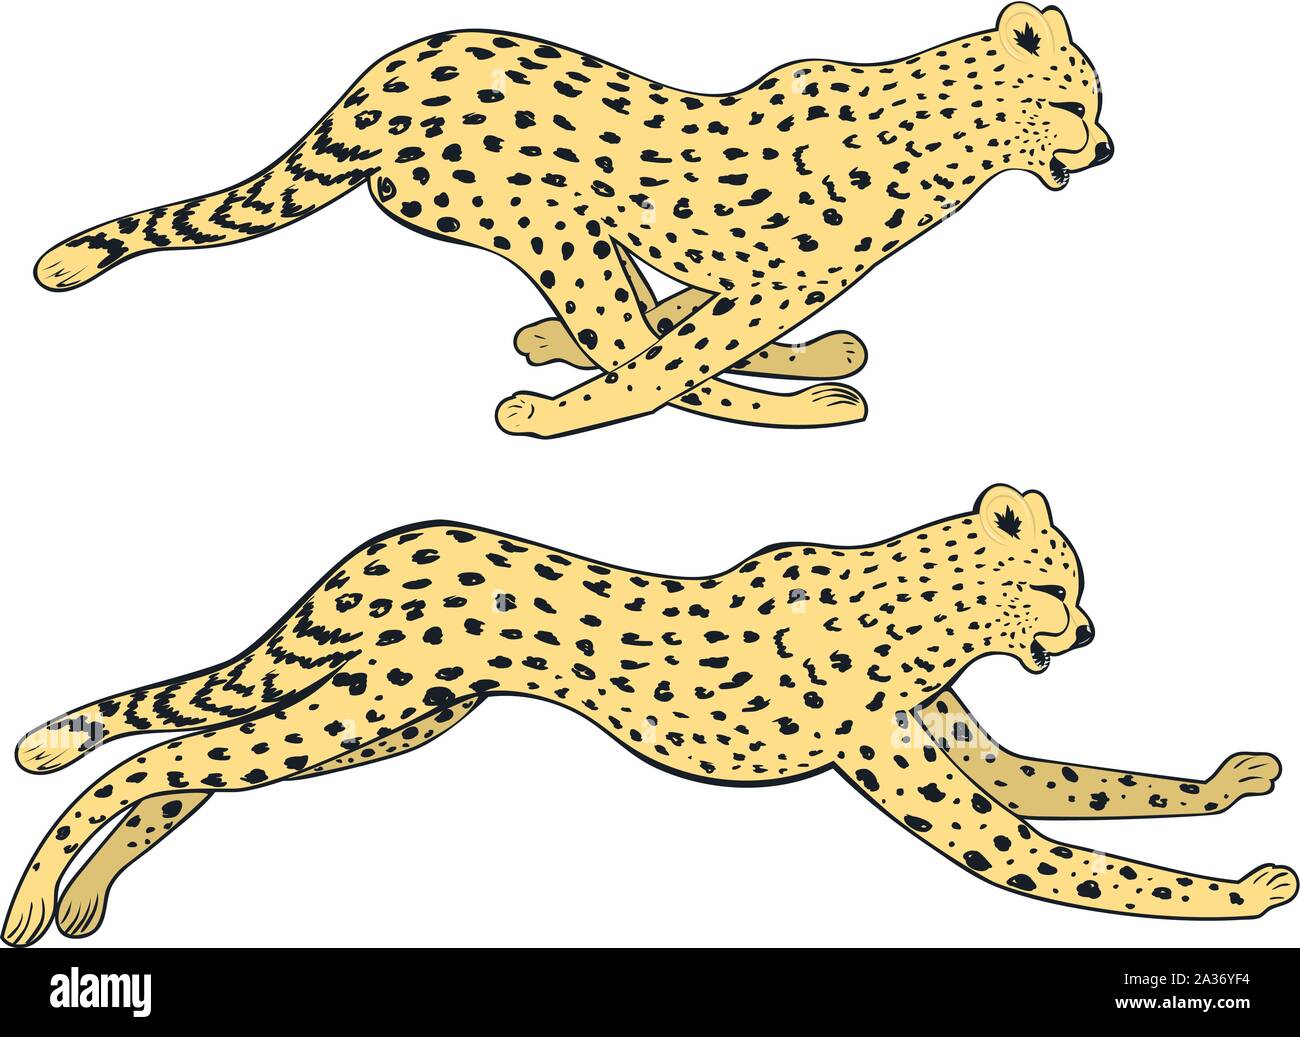 Stylized cheetah silhouette in running pose design illustration. Stock Vector